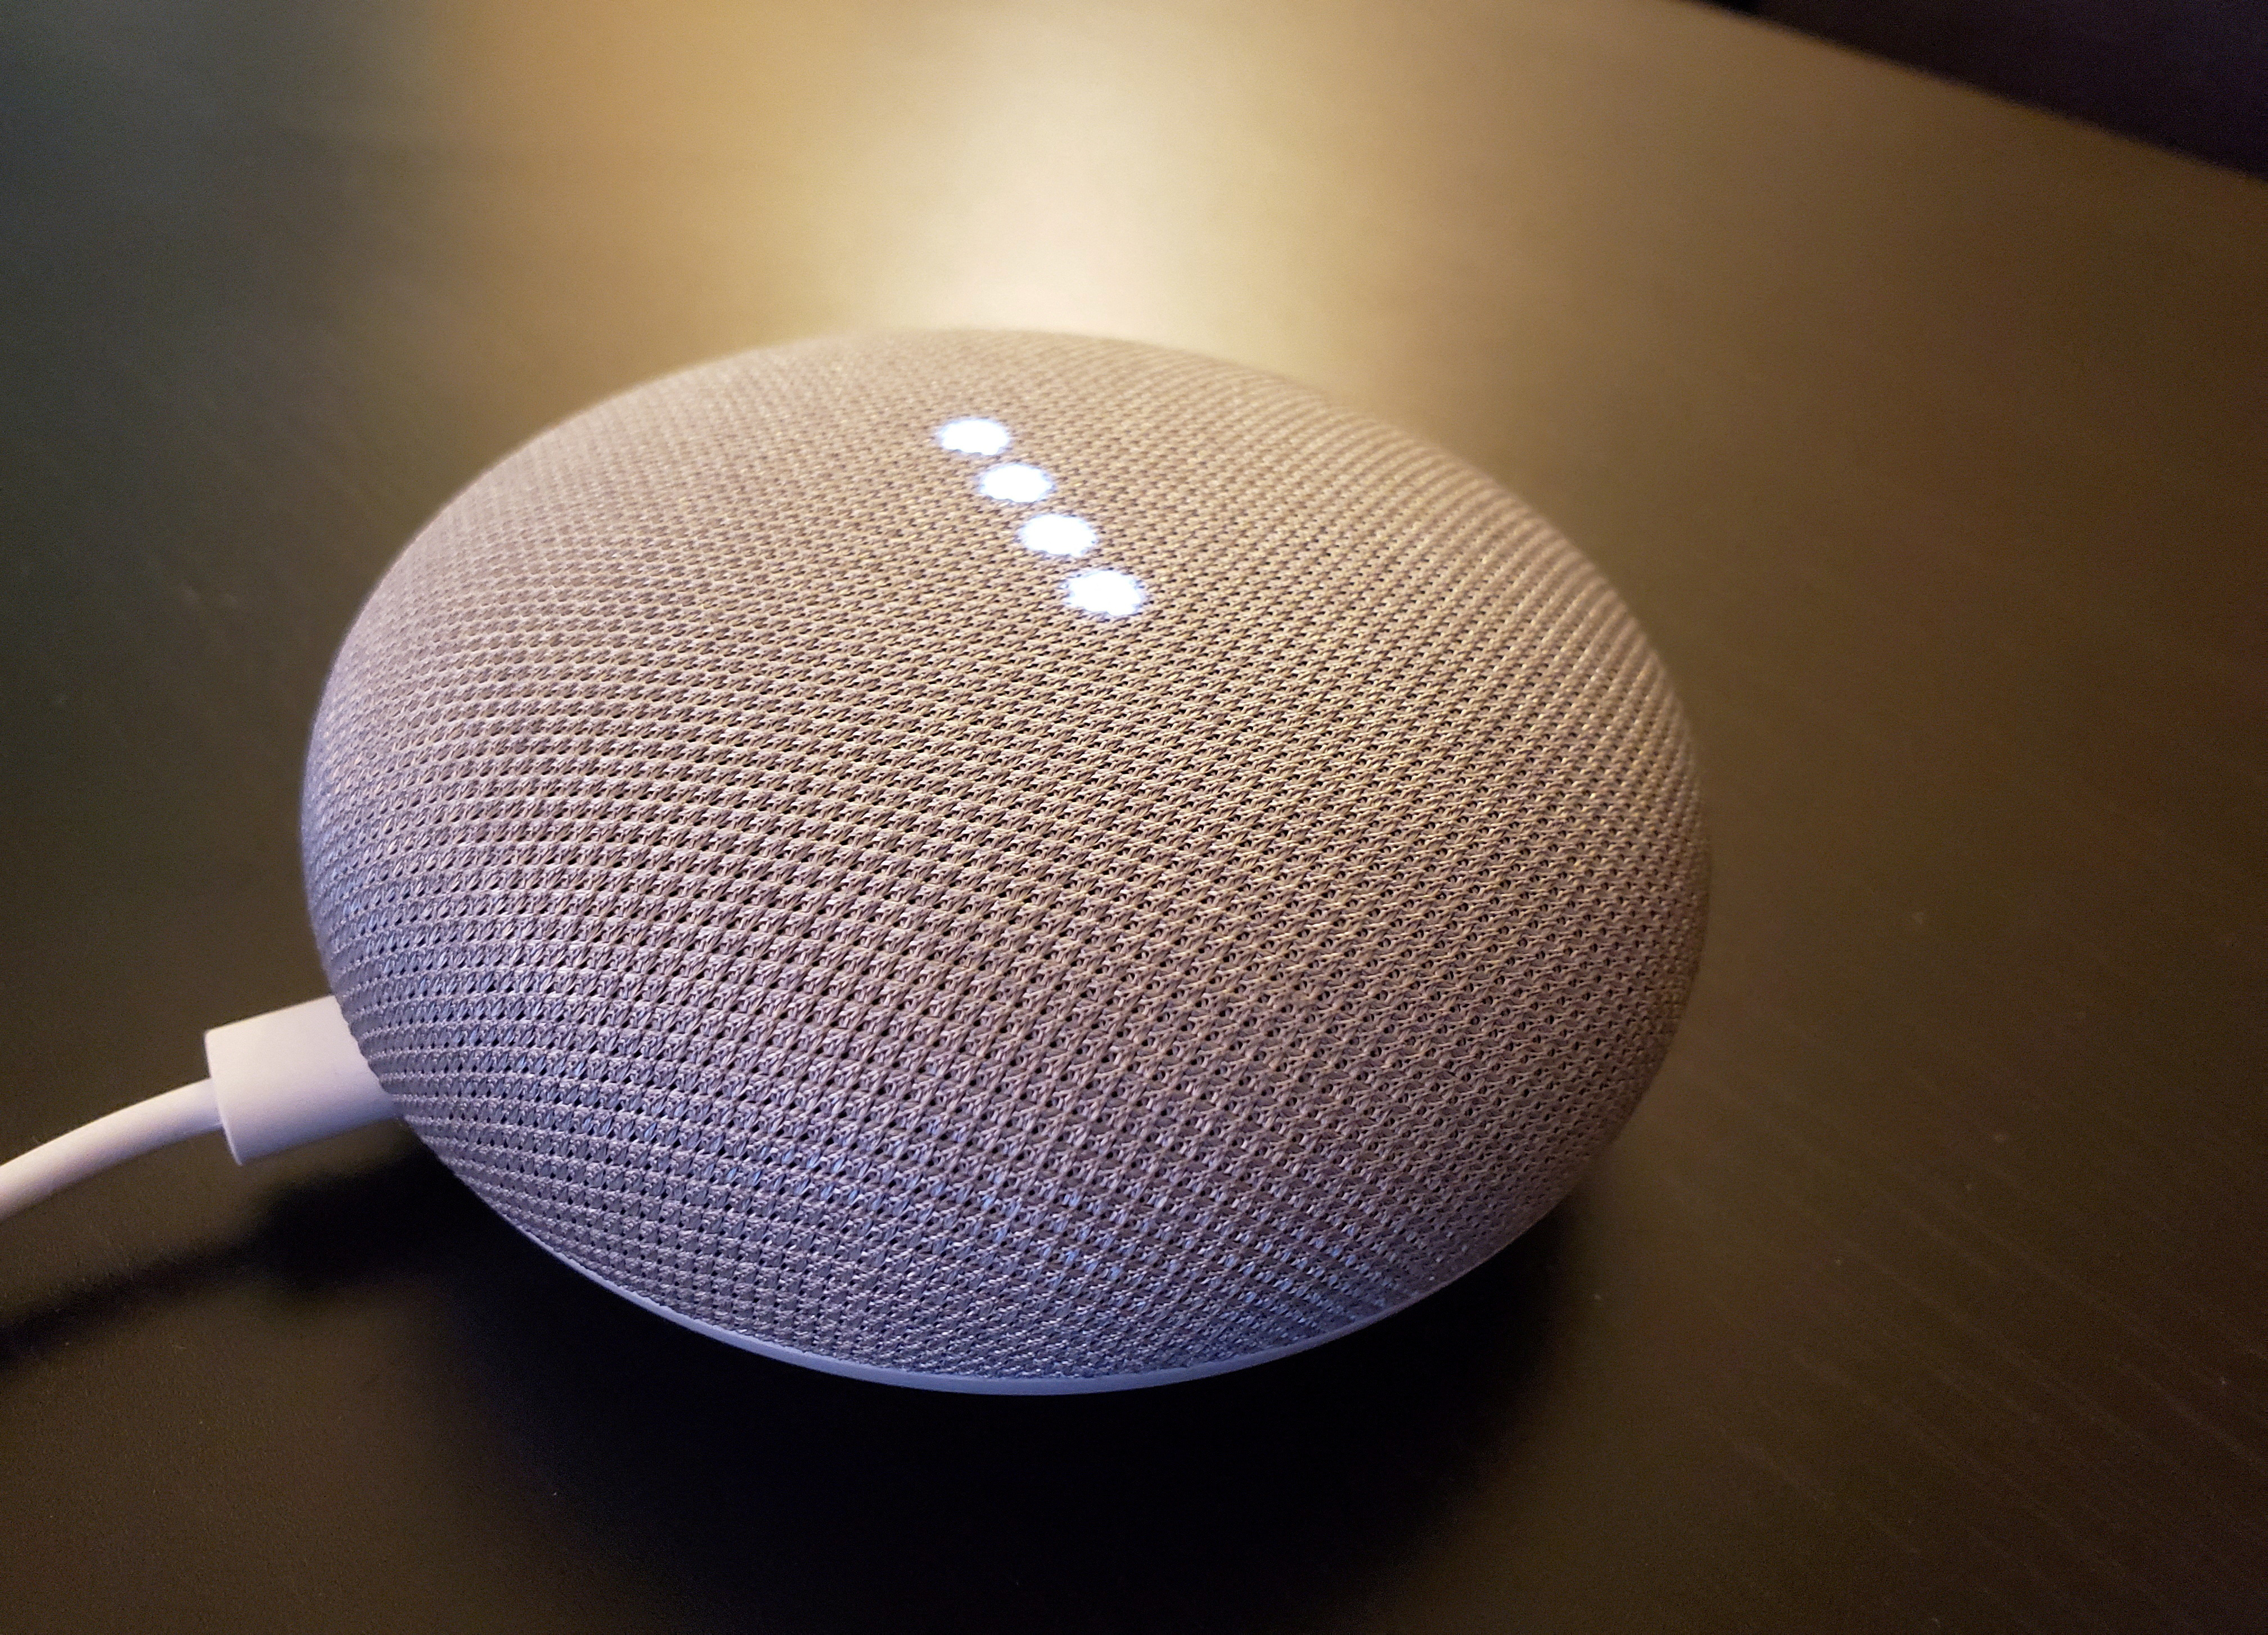 Google Home smart speakers are shown in San Francisco